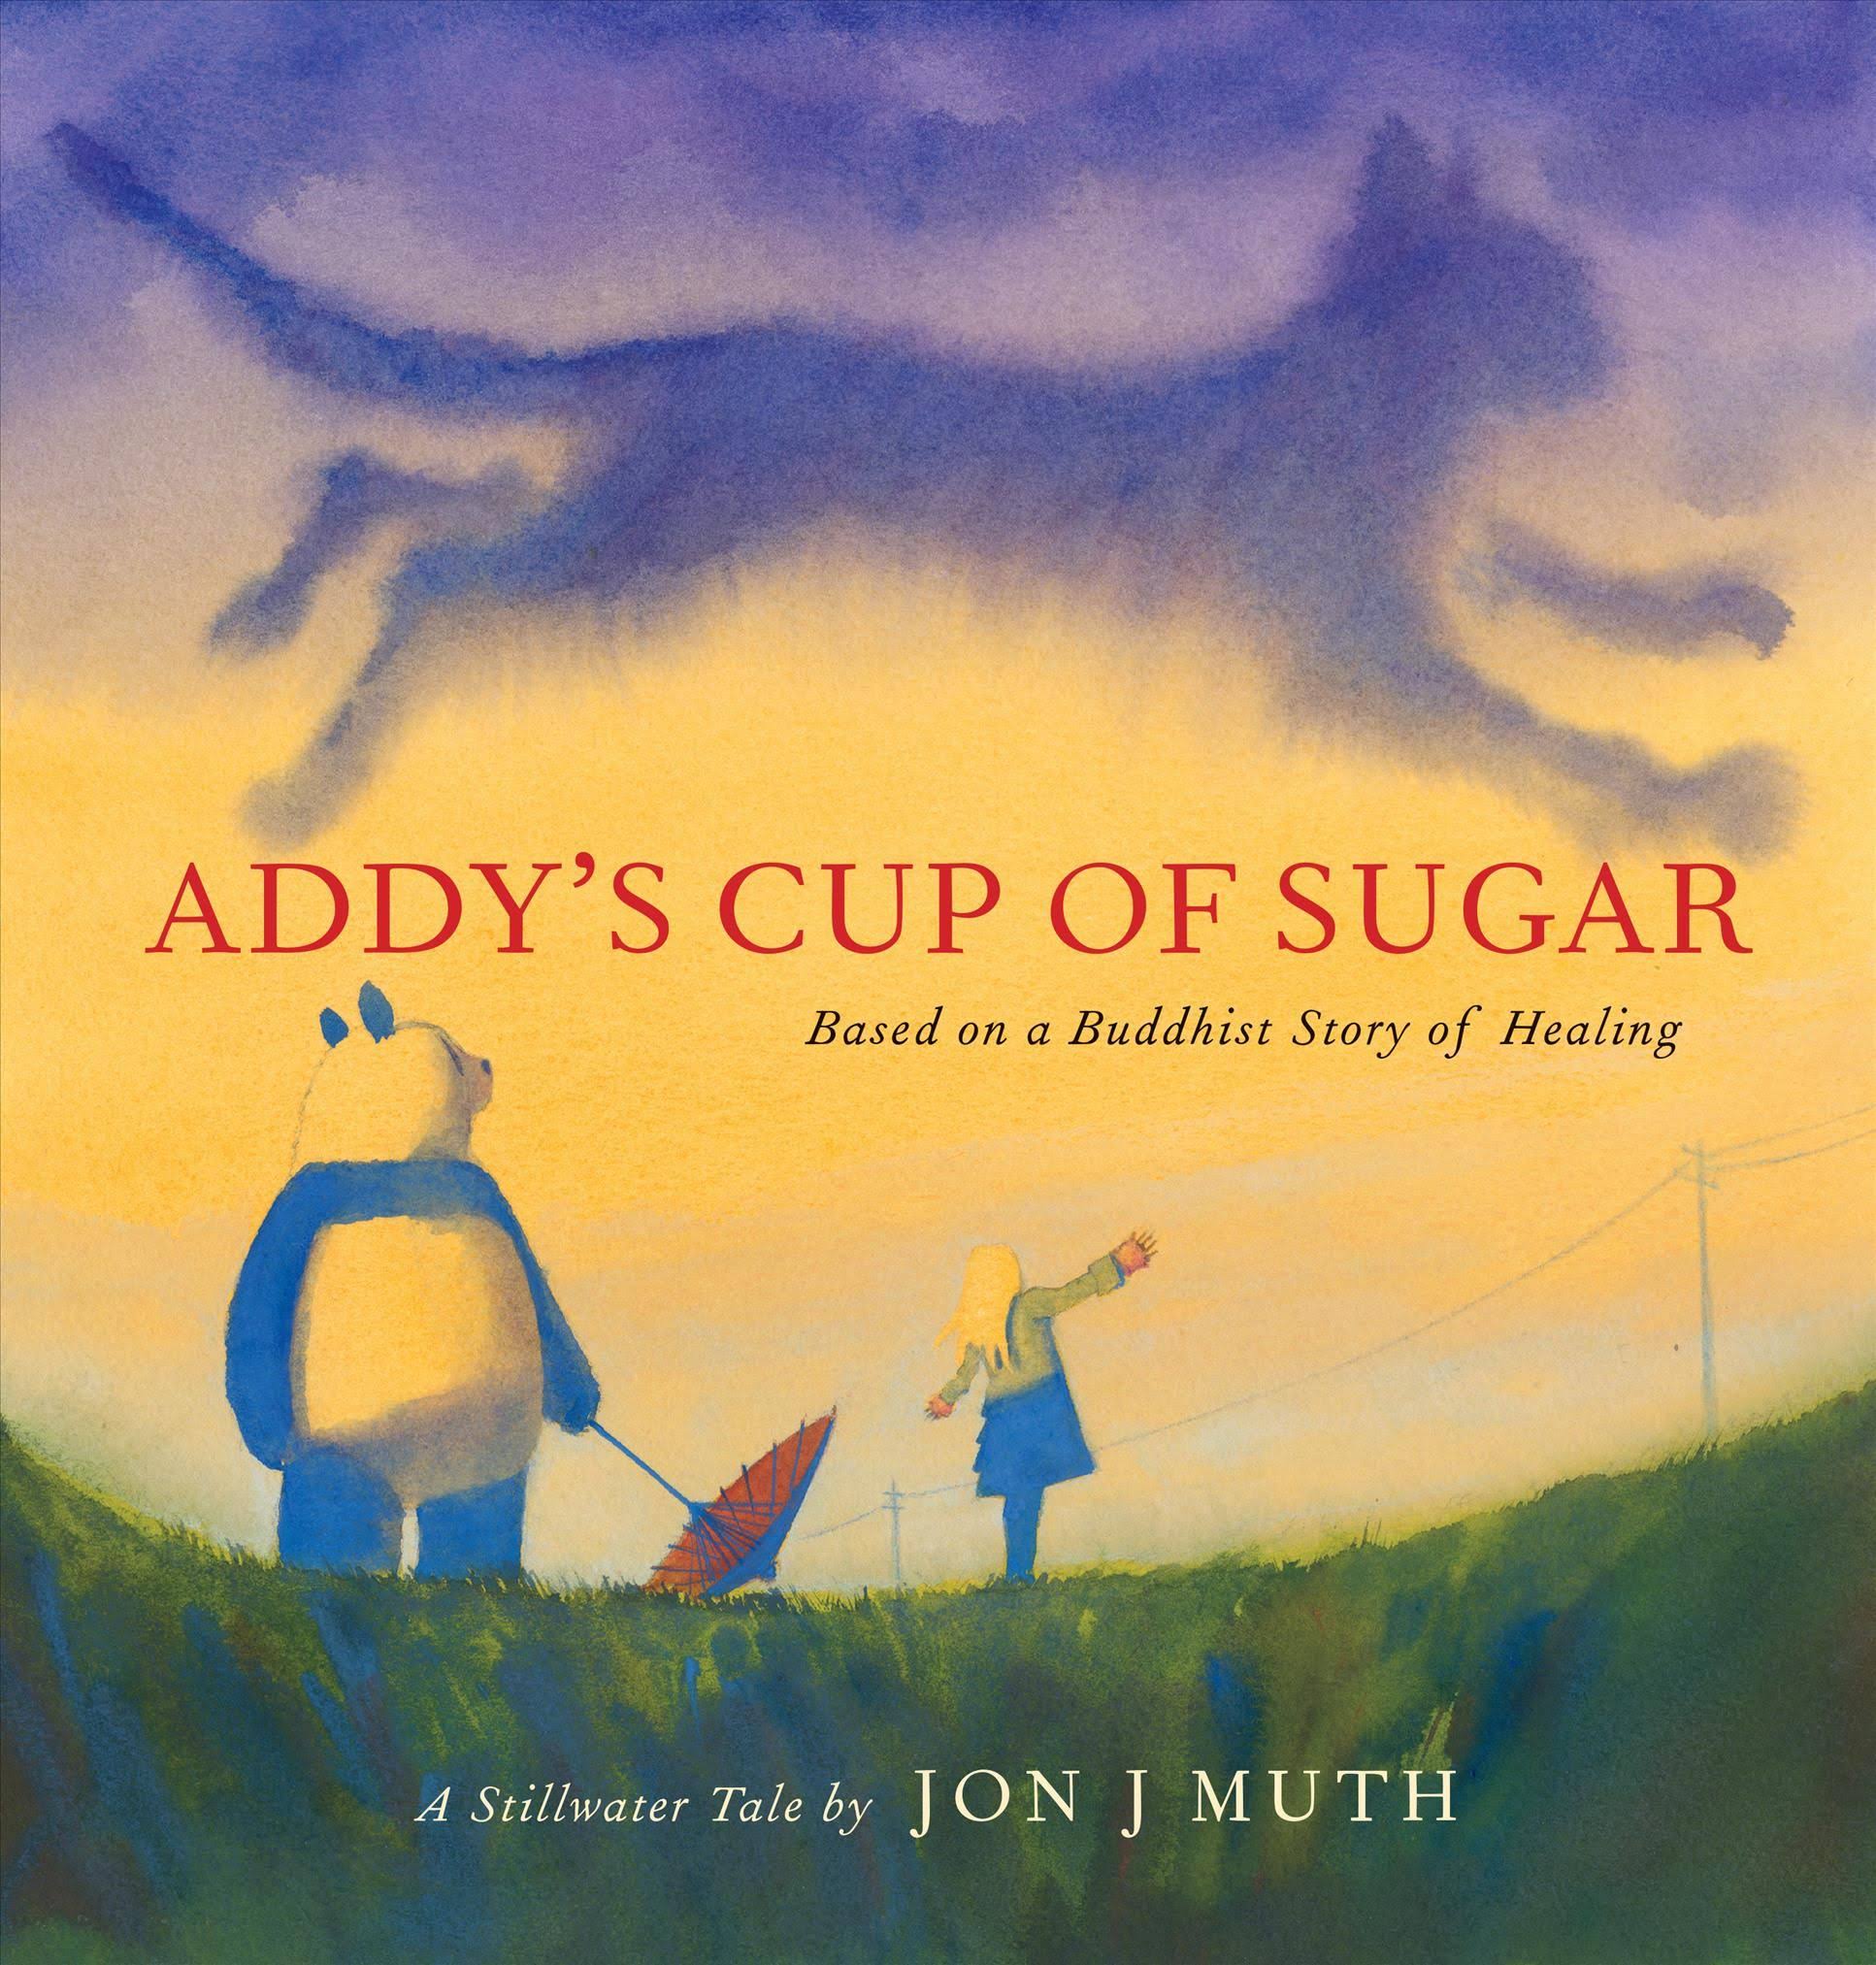 Addy's Cup of Sugar [Book]